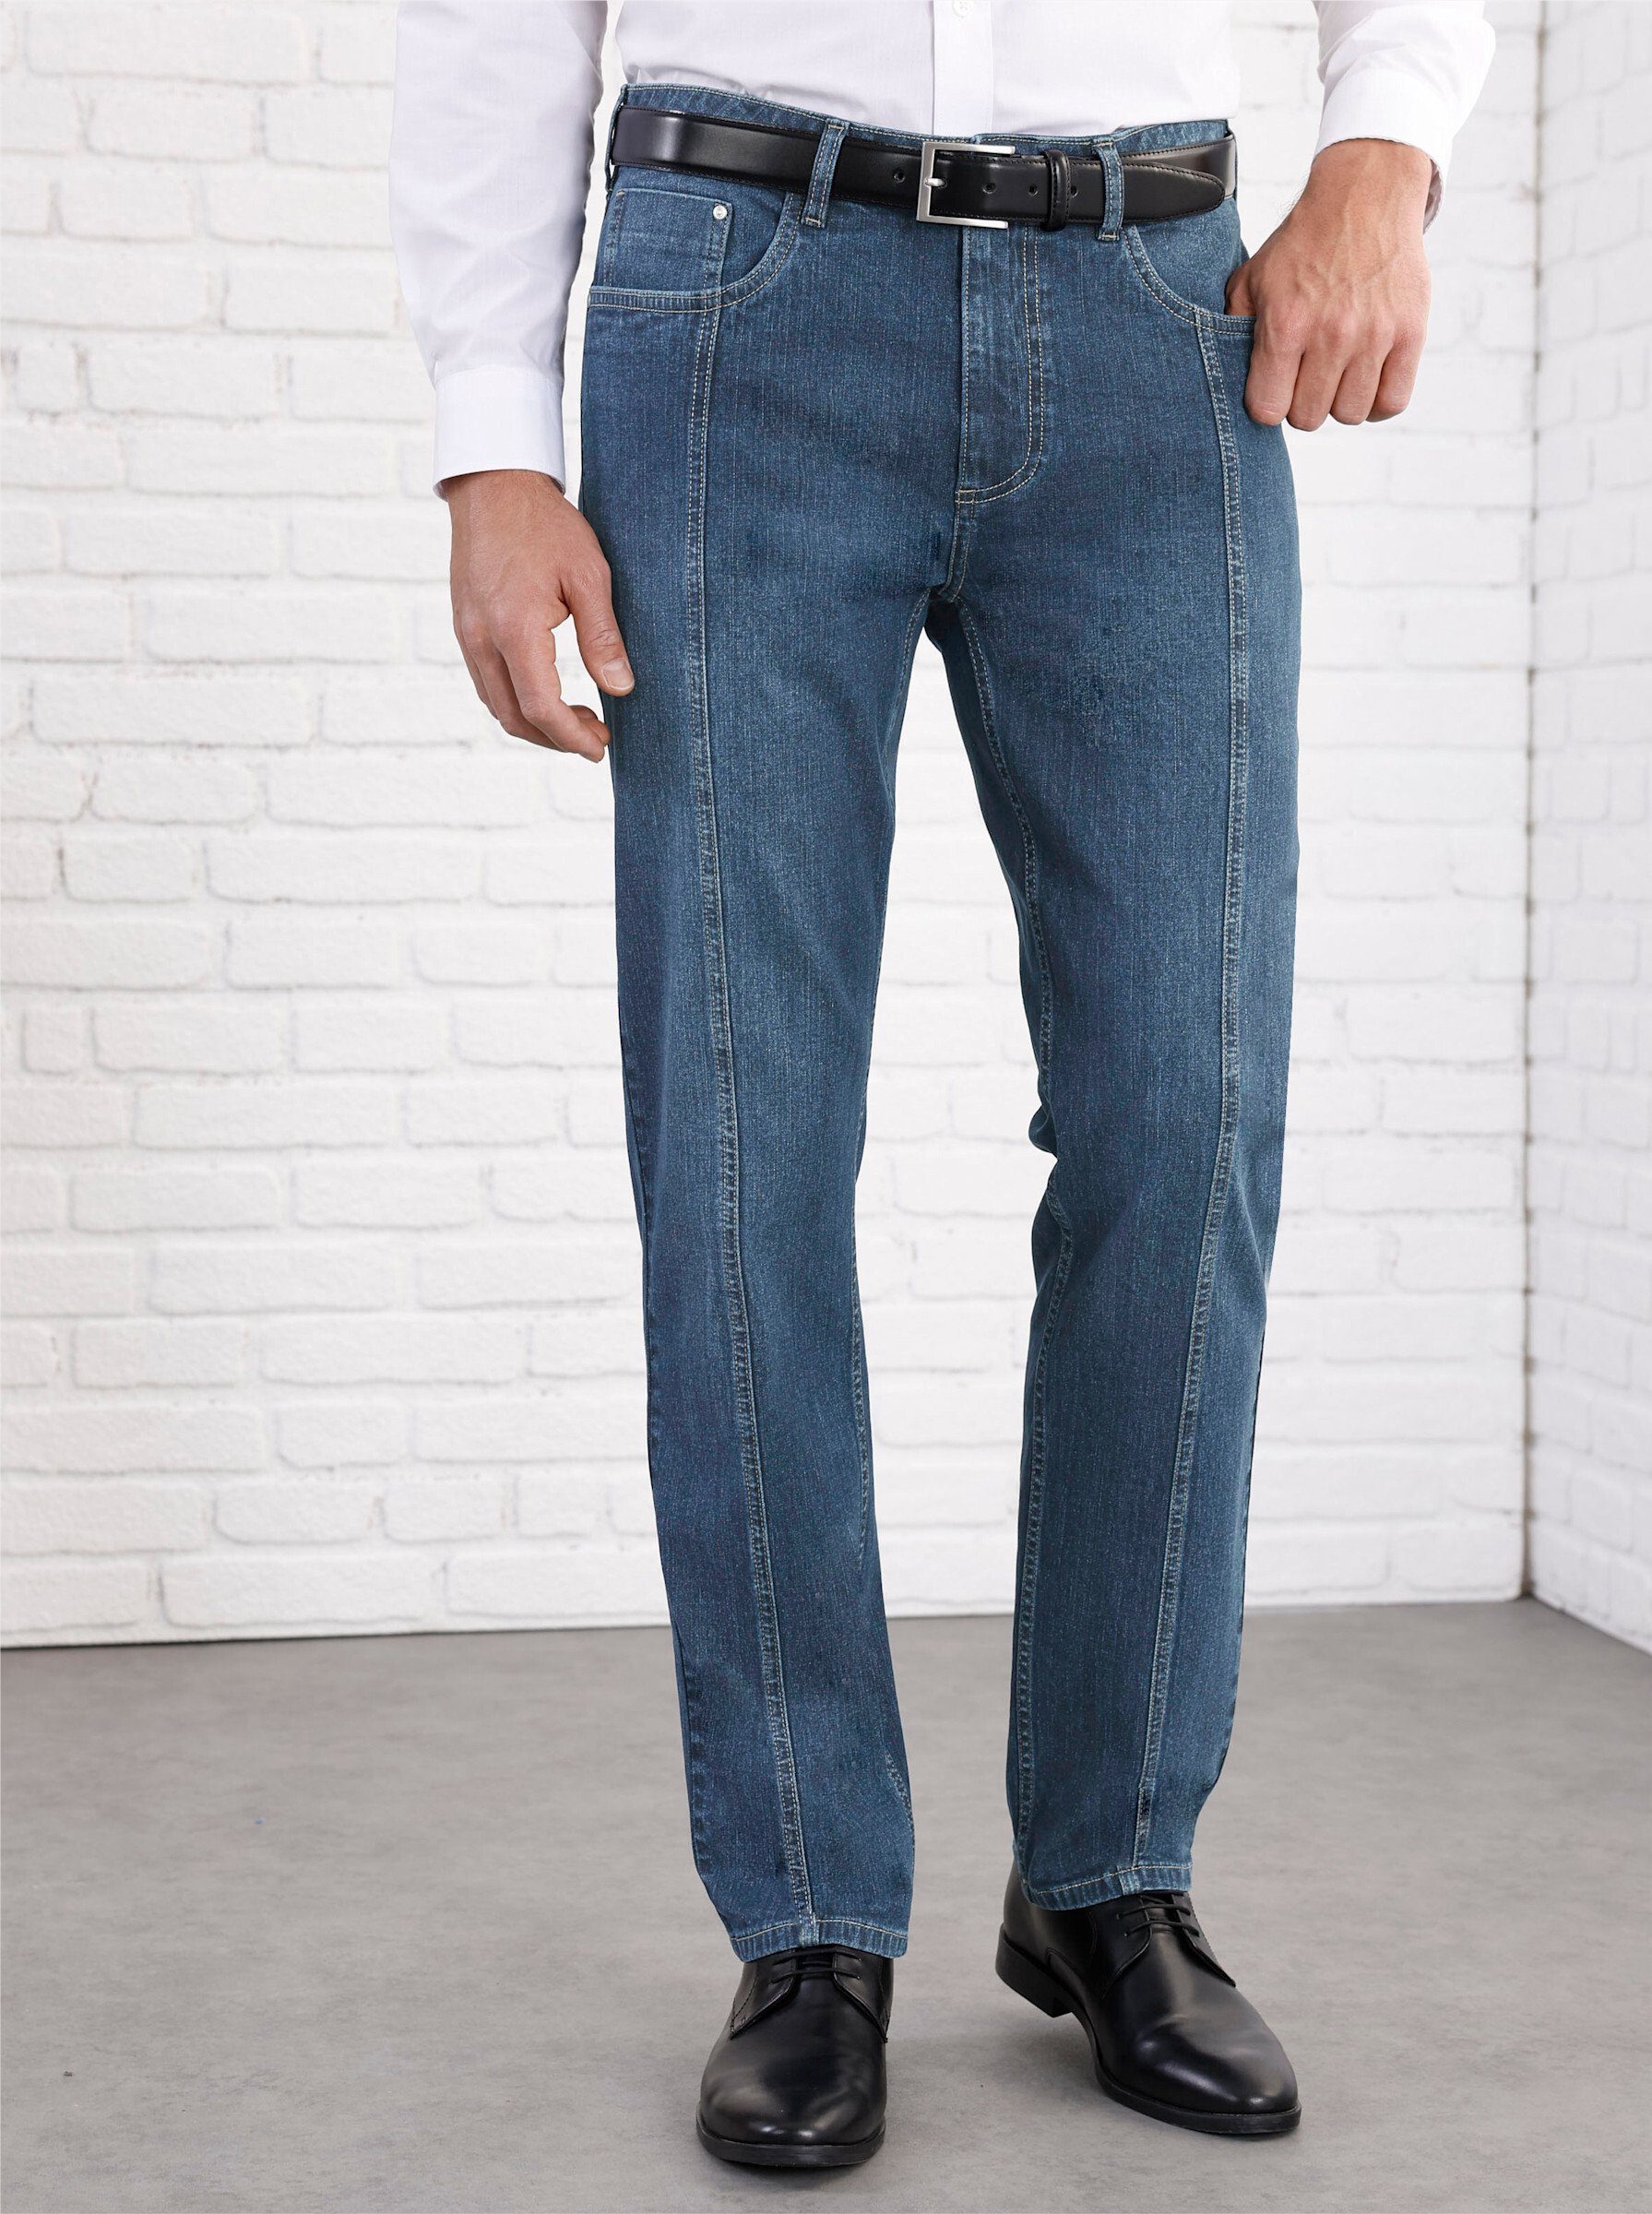 Jeans Bequeme an! blue-stone-washed Sieh